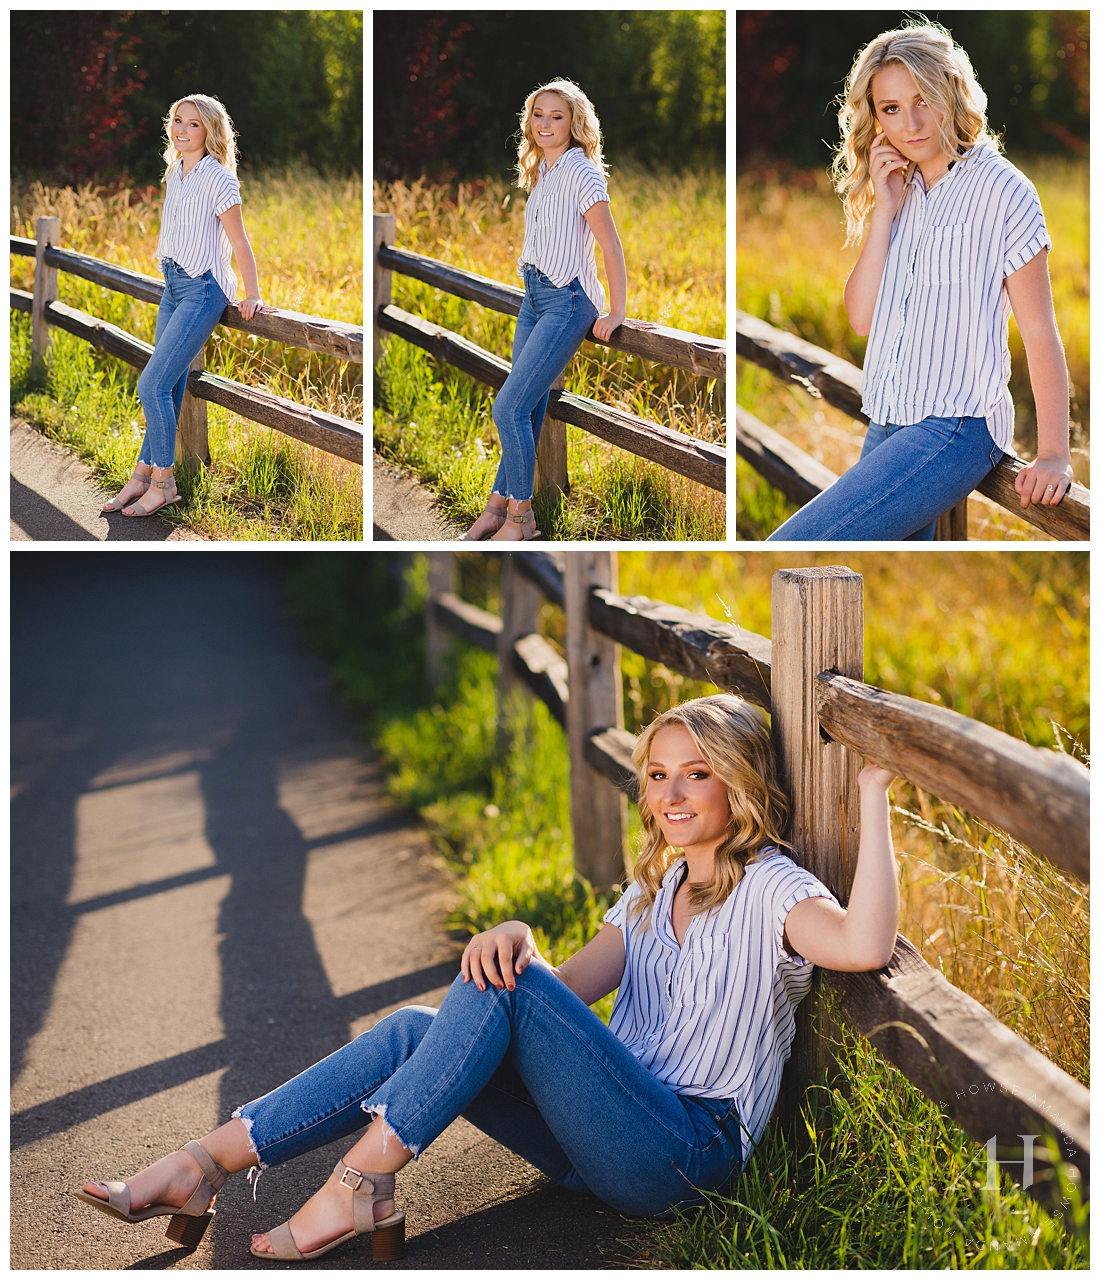 Rustic Fence in Fort Steilacoom | The best place for country senior portraits in Washington | photographed by Tacoma Senior Photographer Amanda Howse